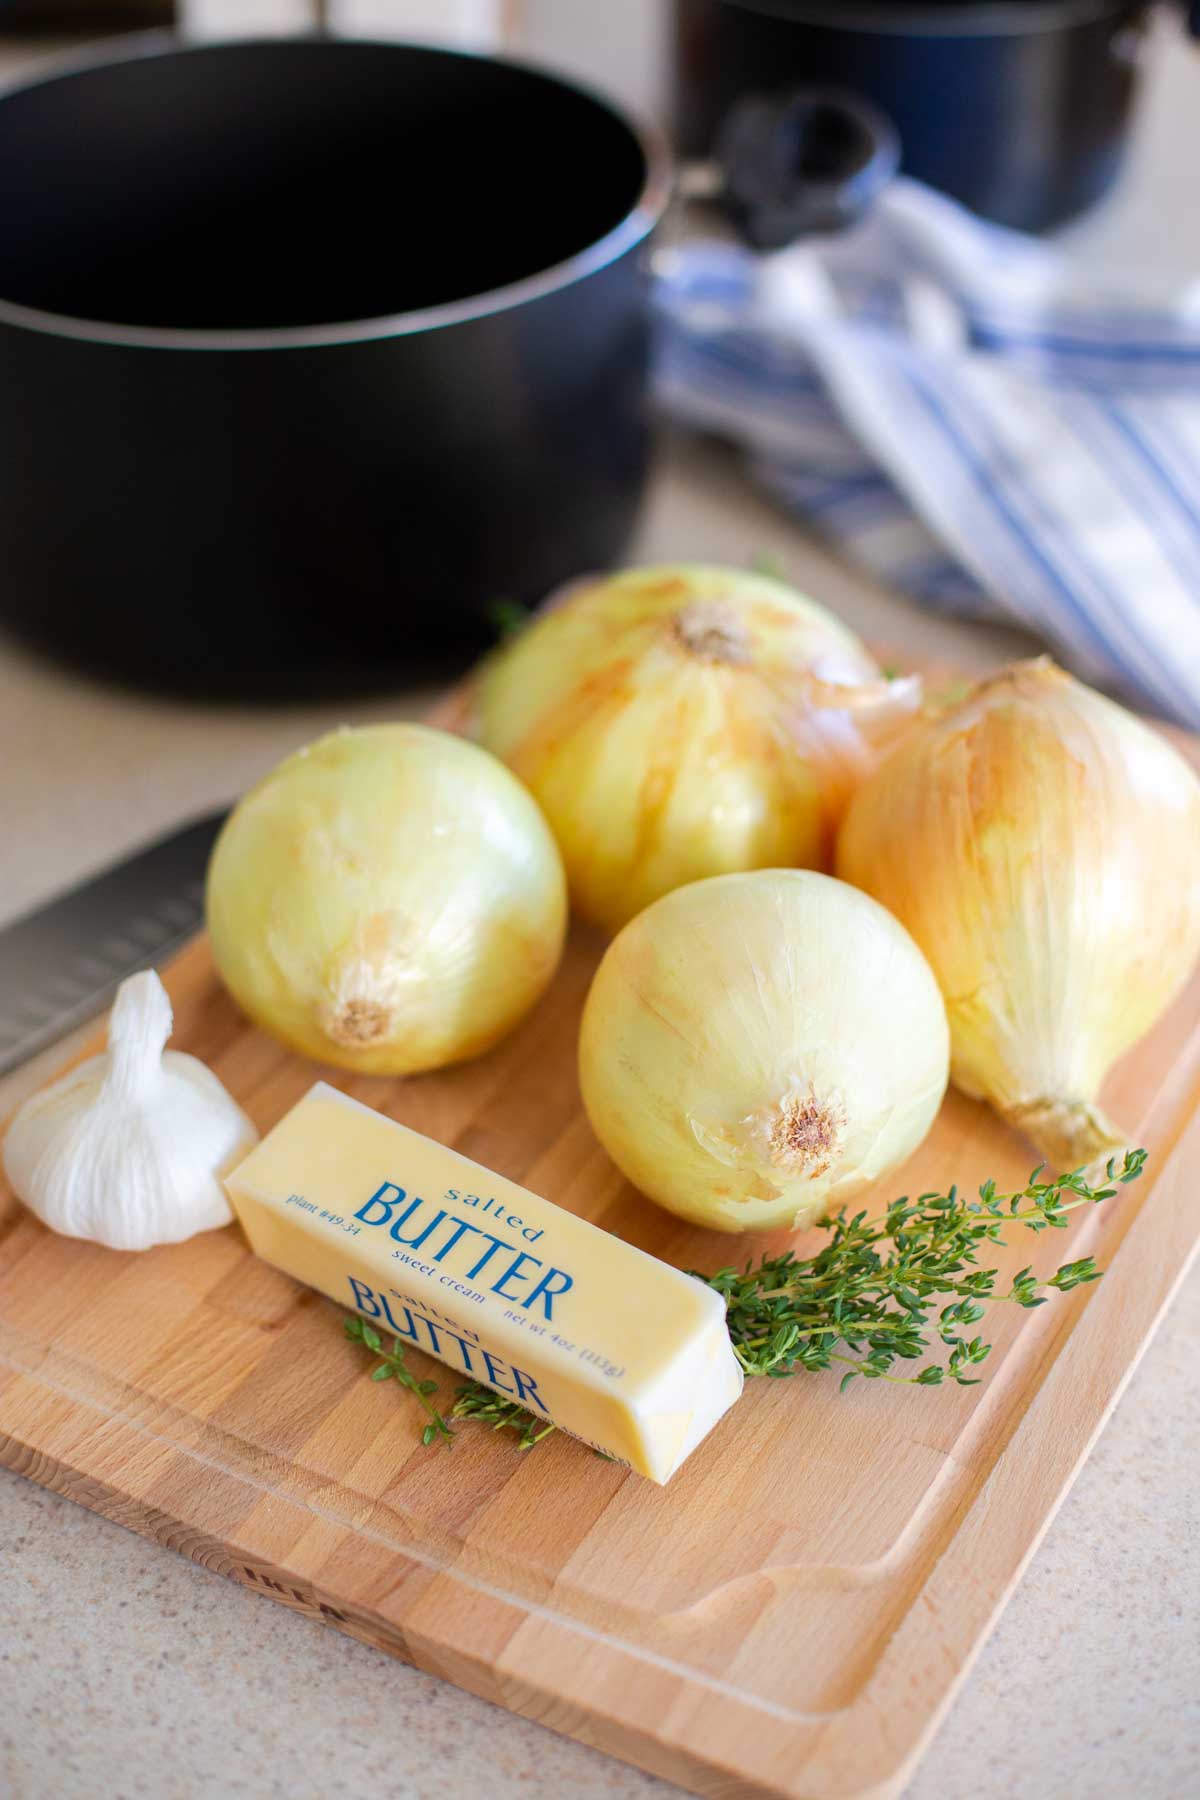 The onions and butter and herbs and garlic are on a cutting board.